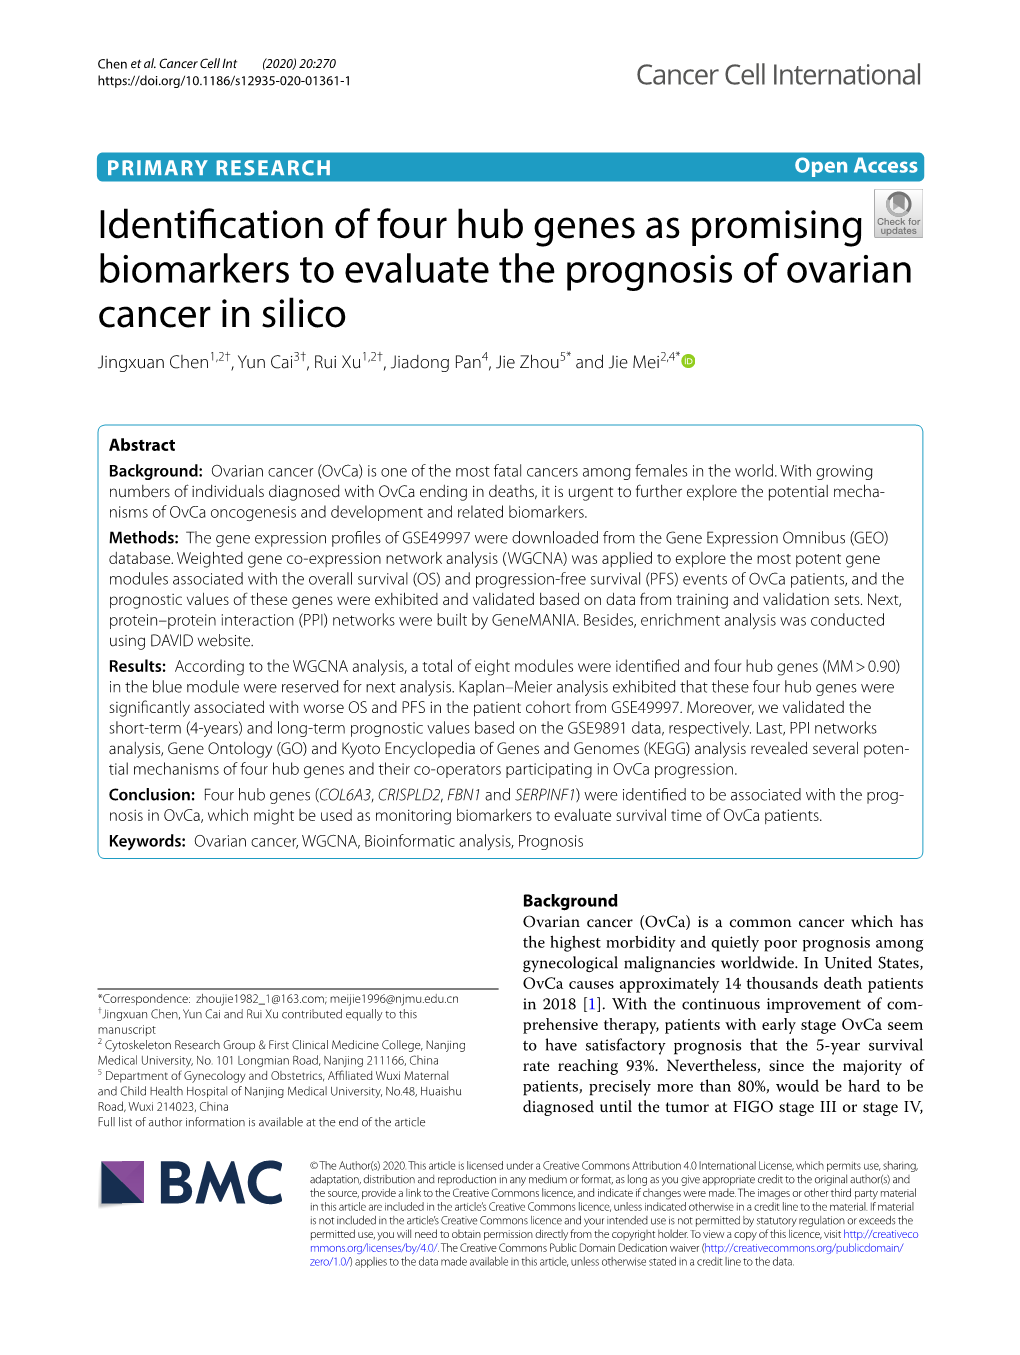 Identification of Four Hub Genes As Promising Biomarkers to Evaluate